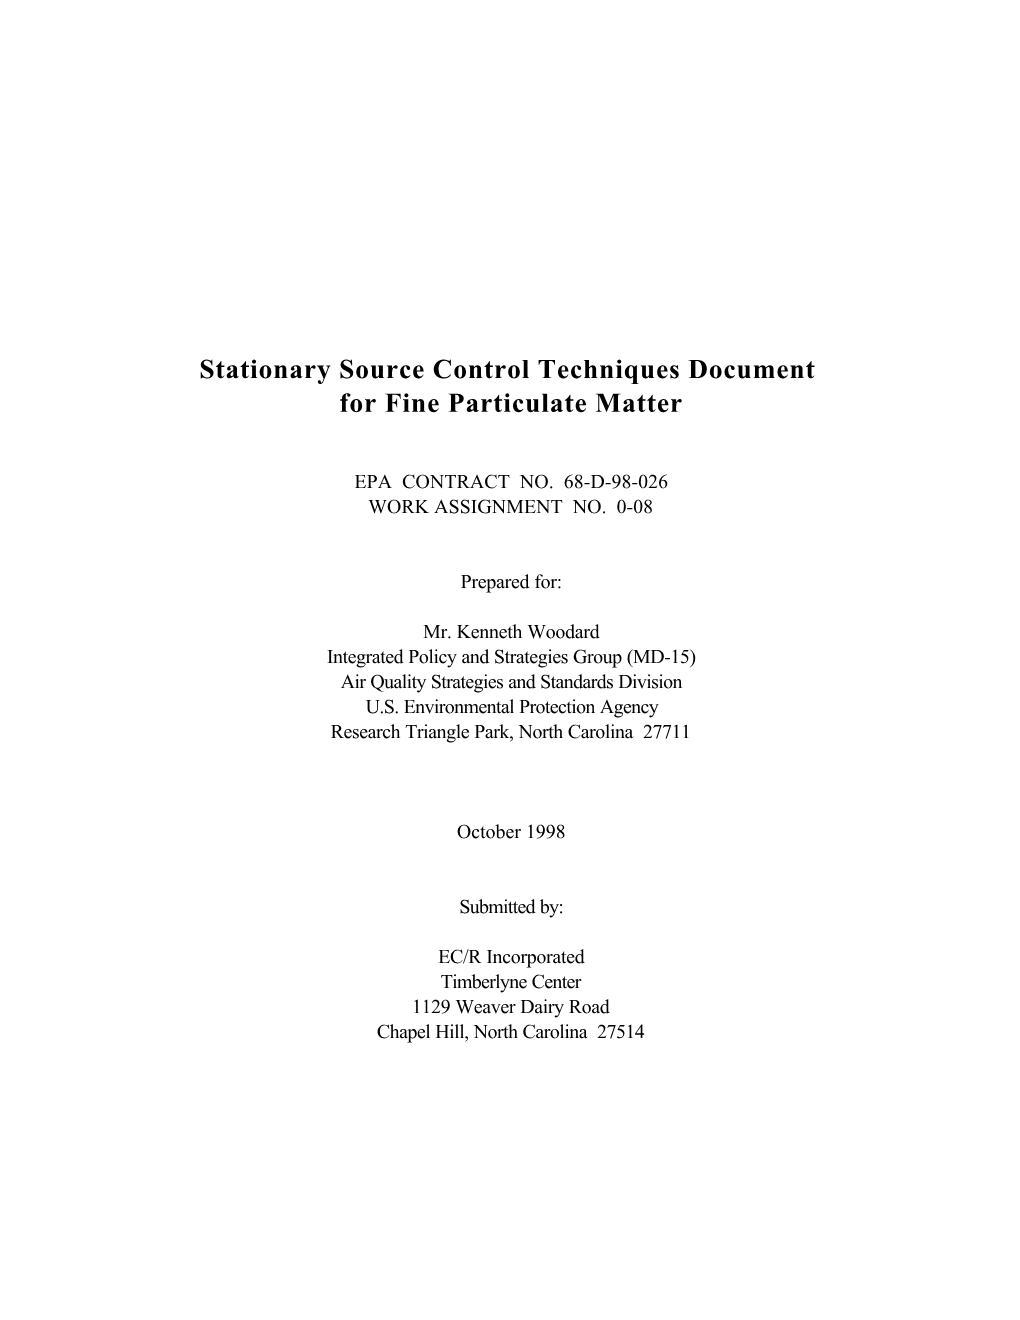 Stationary Source Control Techniques Document for Fine Particulate Matter